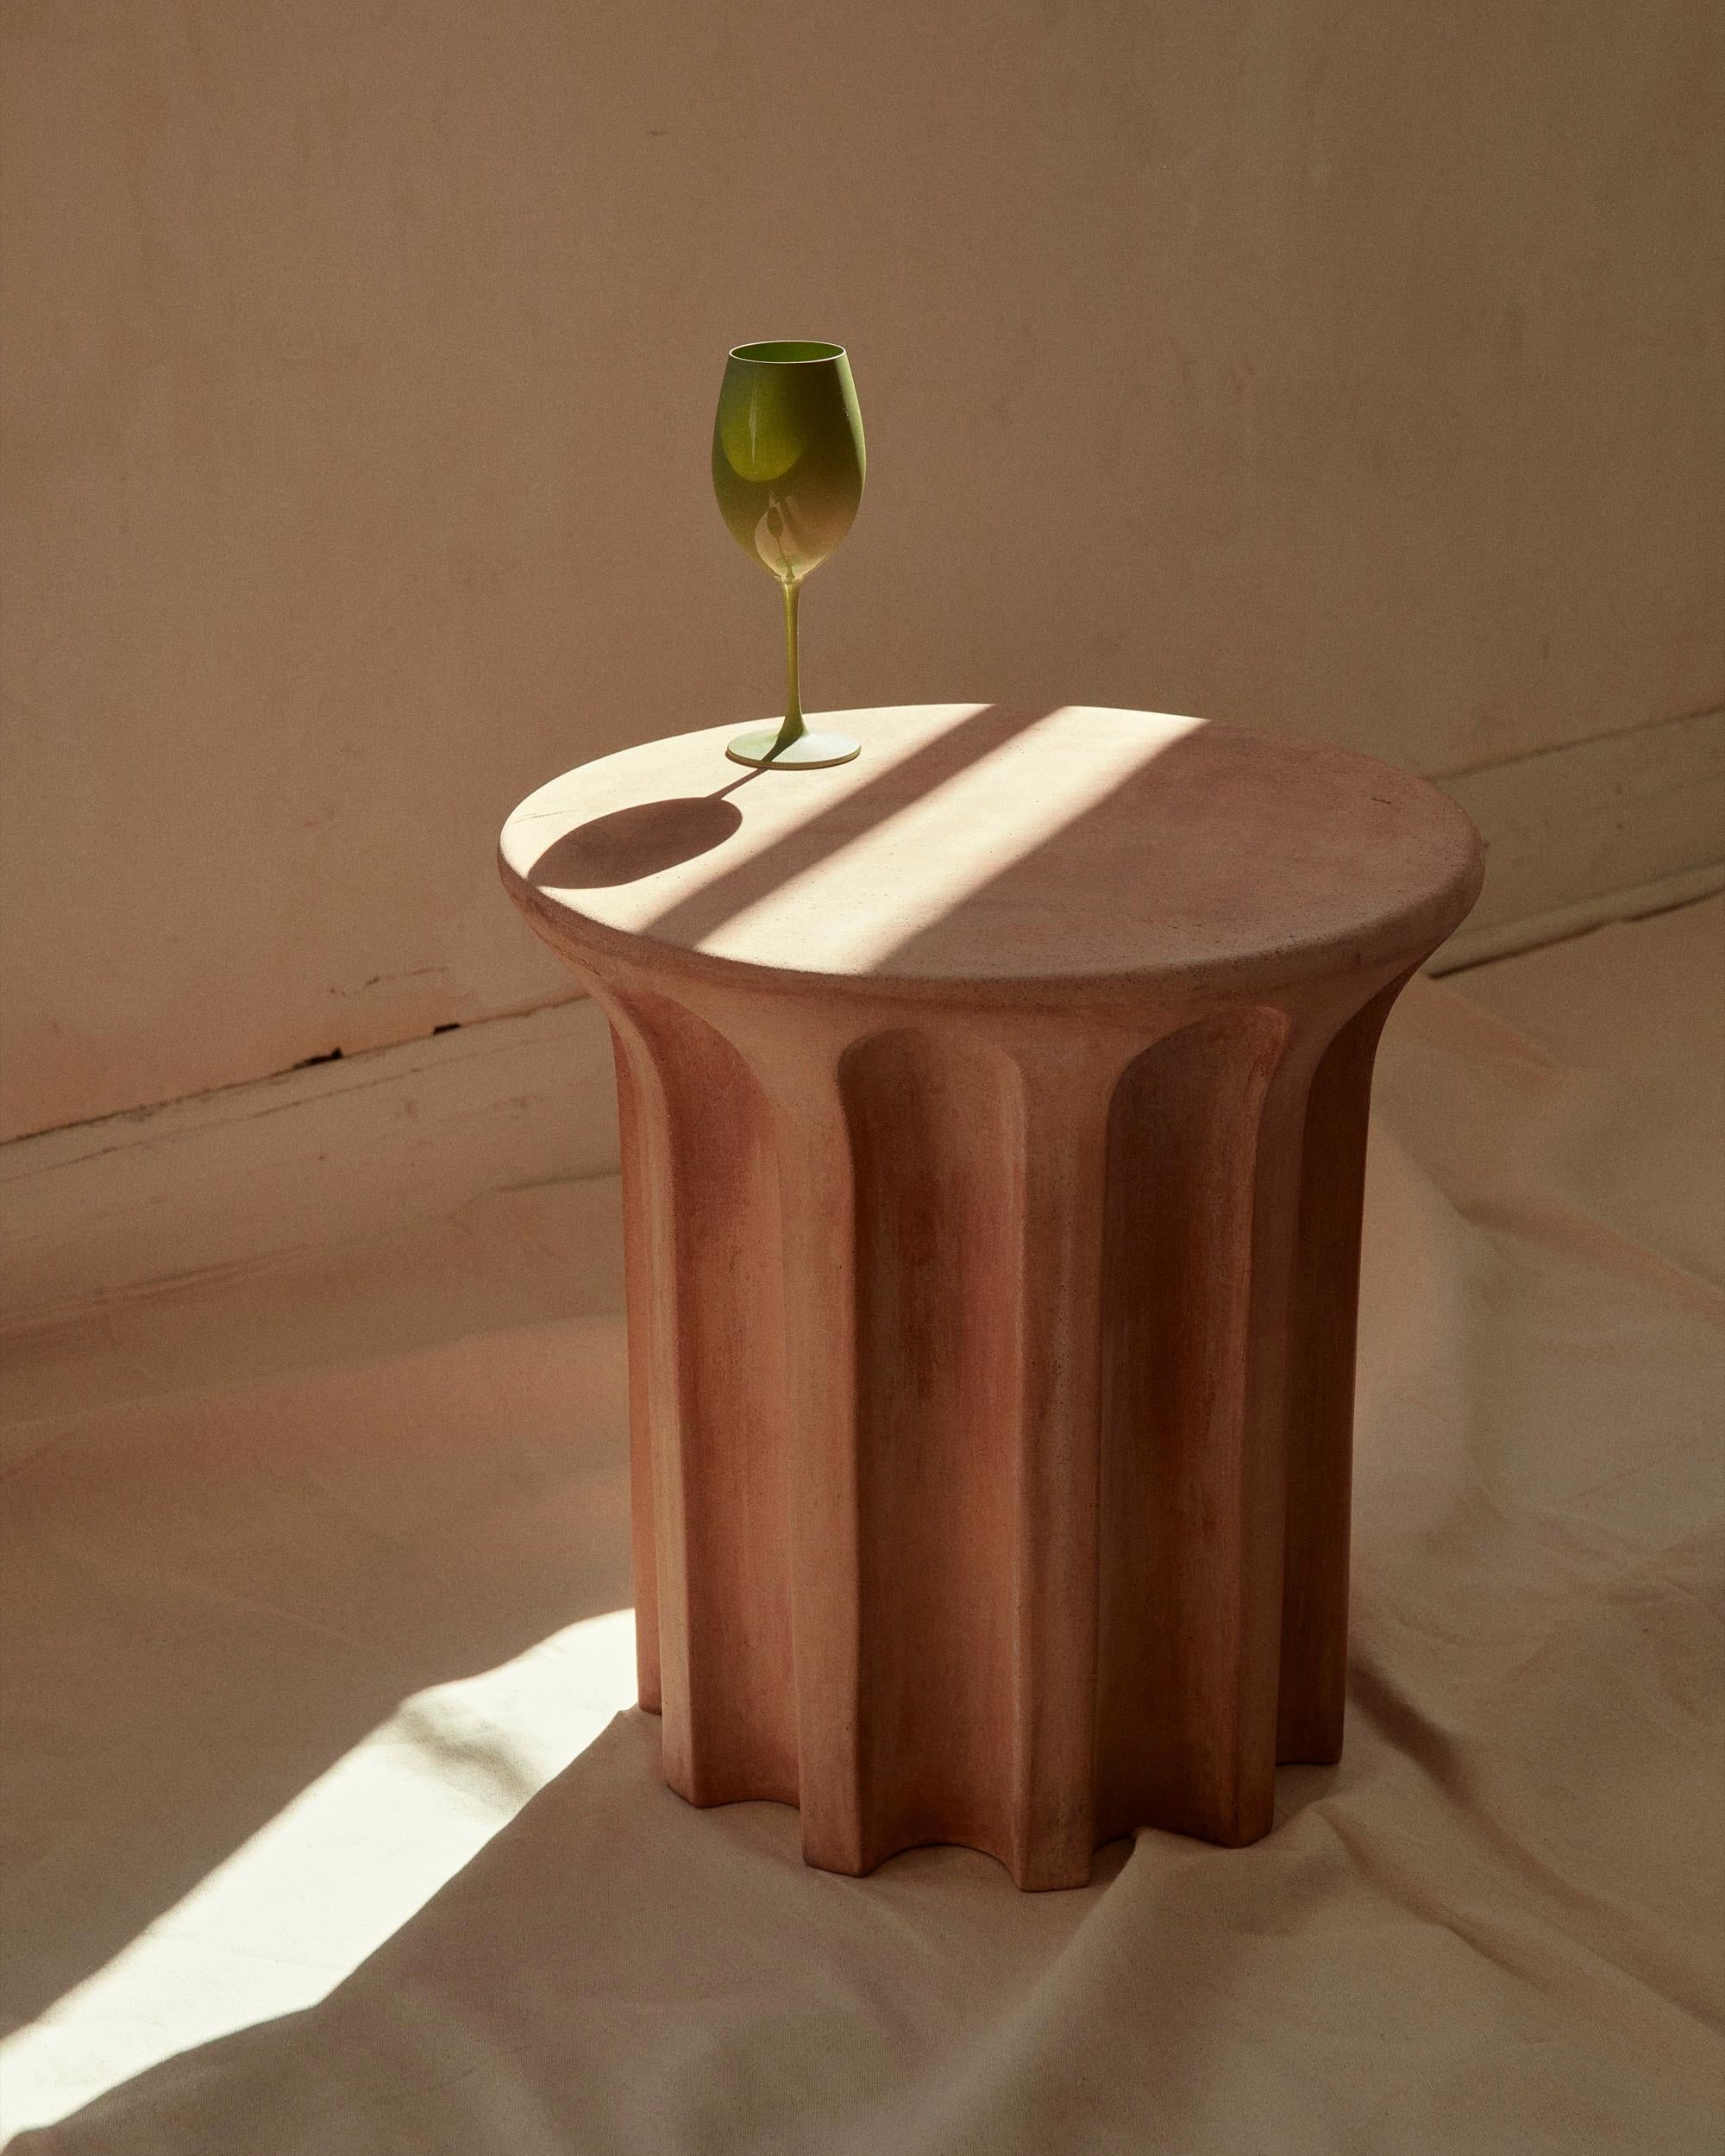 A robust terracotta side table featuring a revolving carousel of voids that call to mind the shapes used in architecture and design for centuries. A contemporary exploration of classical form that celebrates the history and legacy of this natural